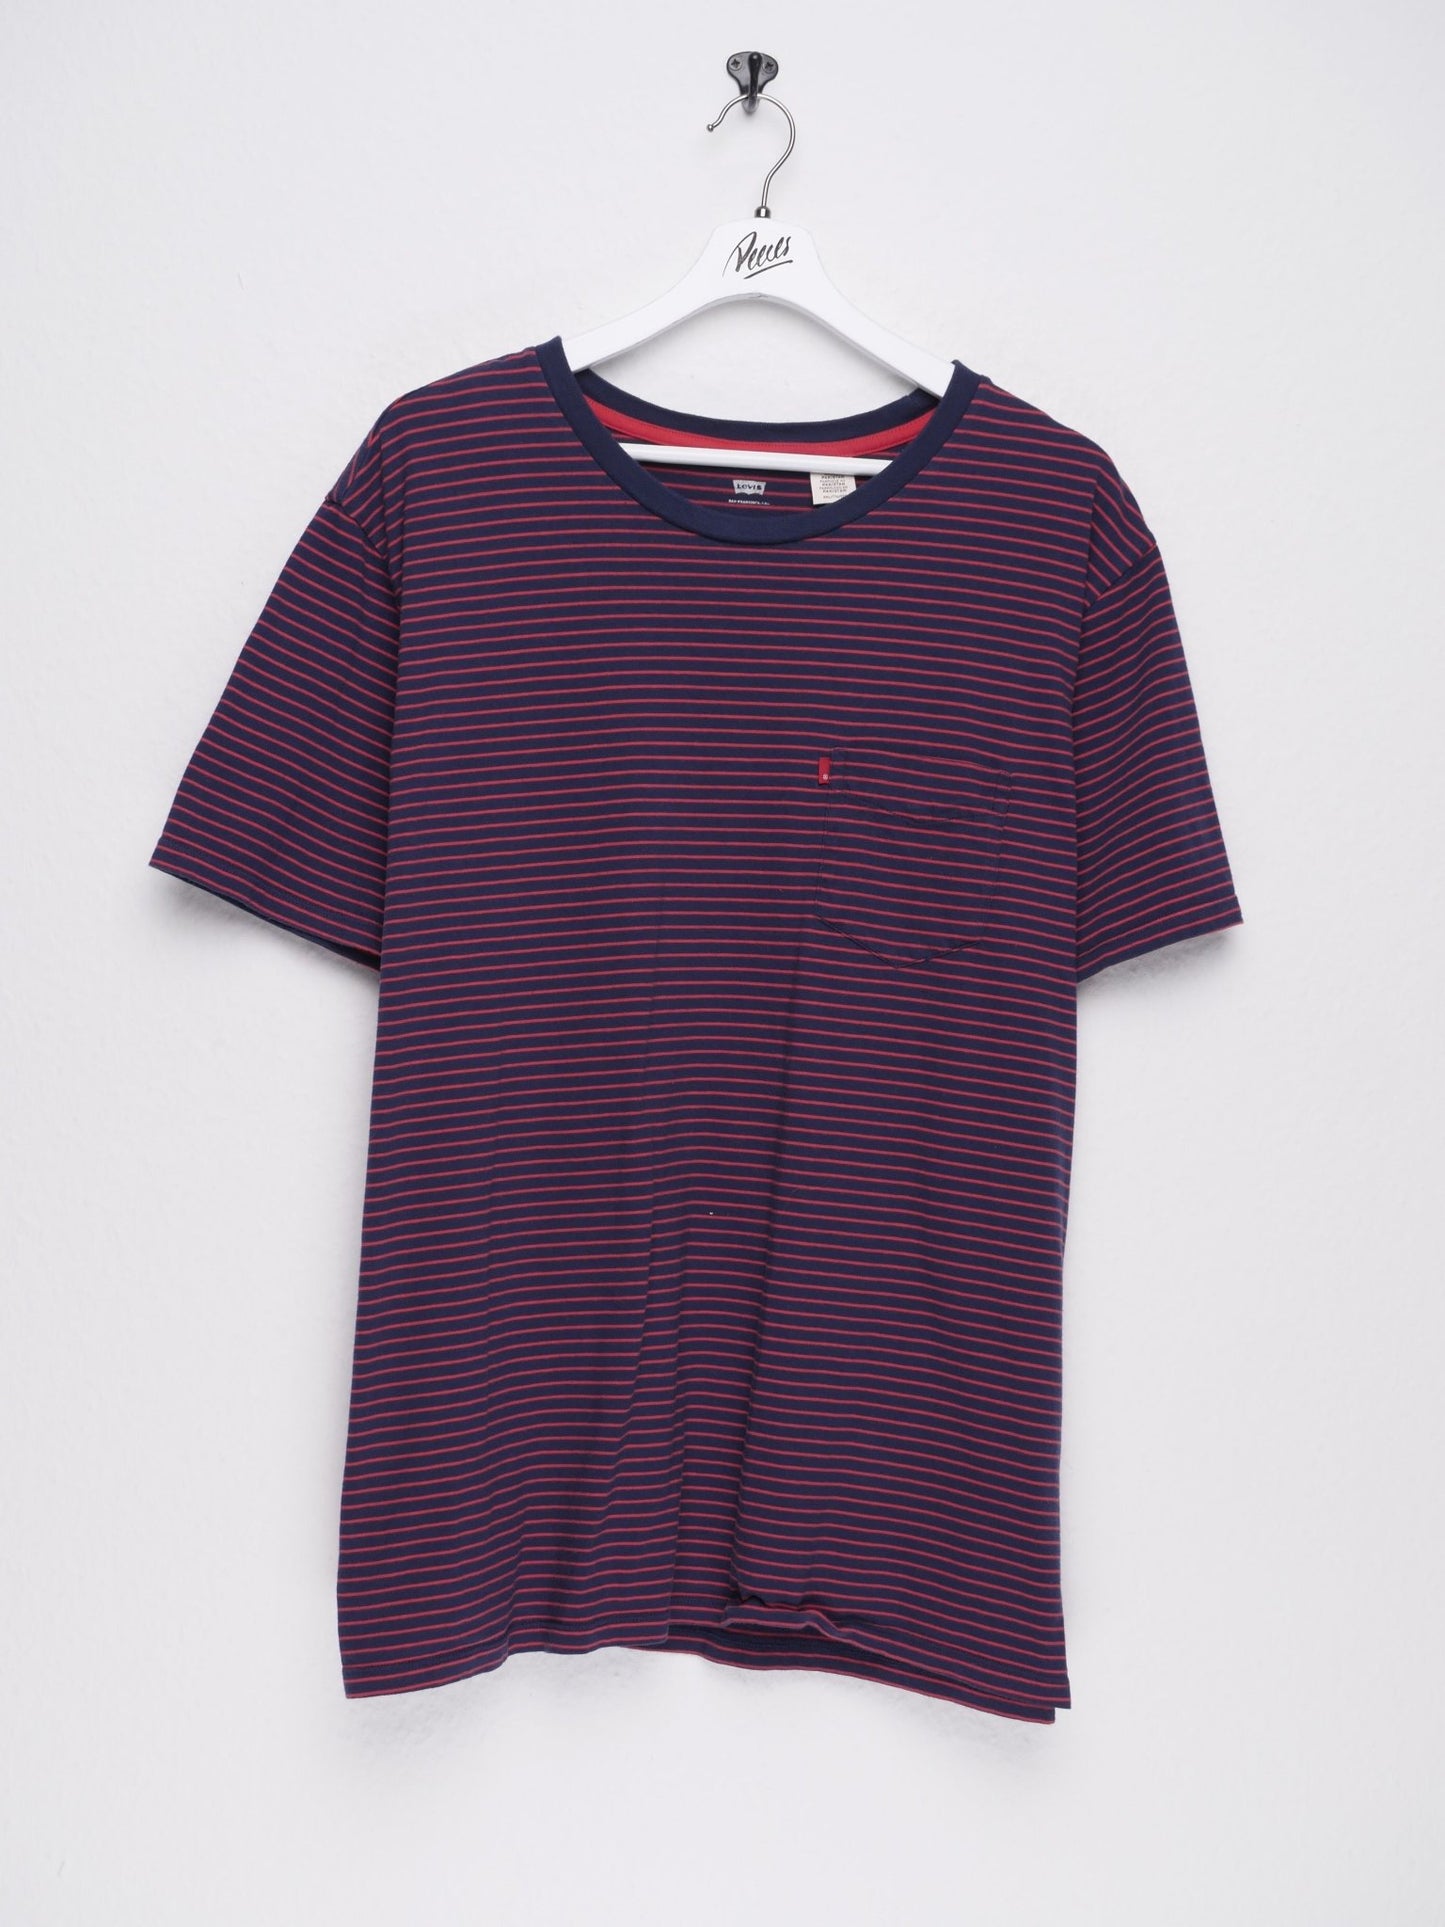 levis patched Logo two toned striped Shirt - Peeces